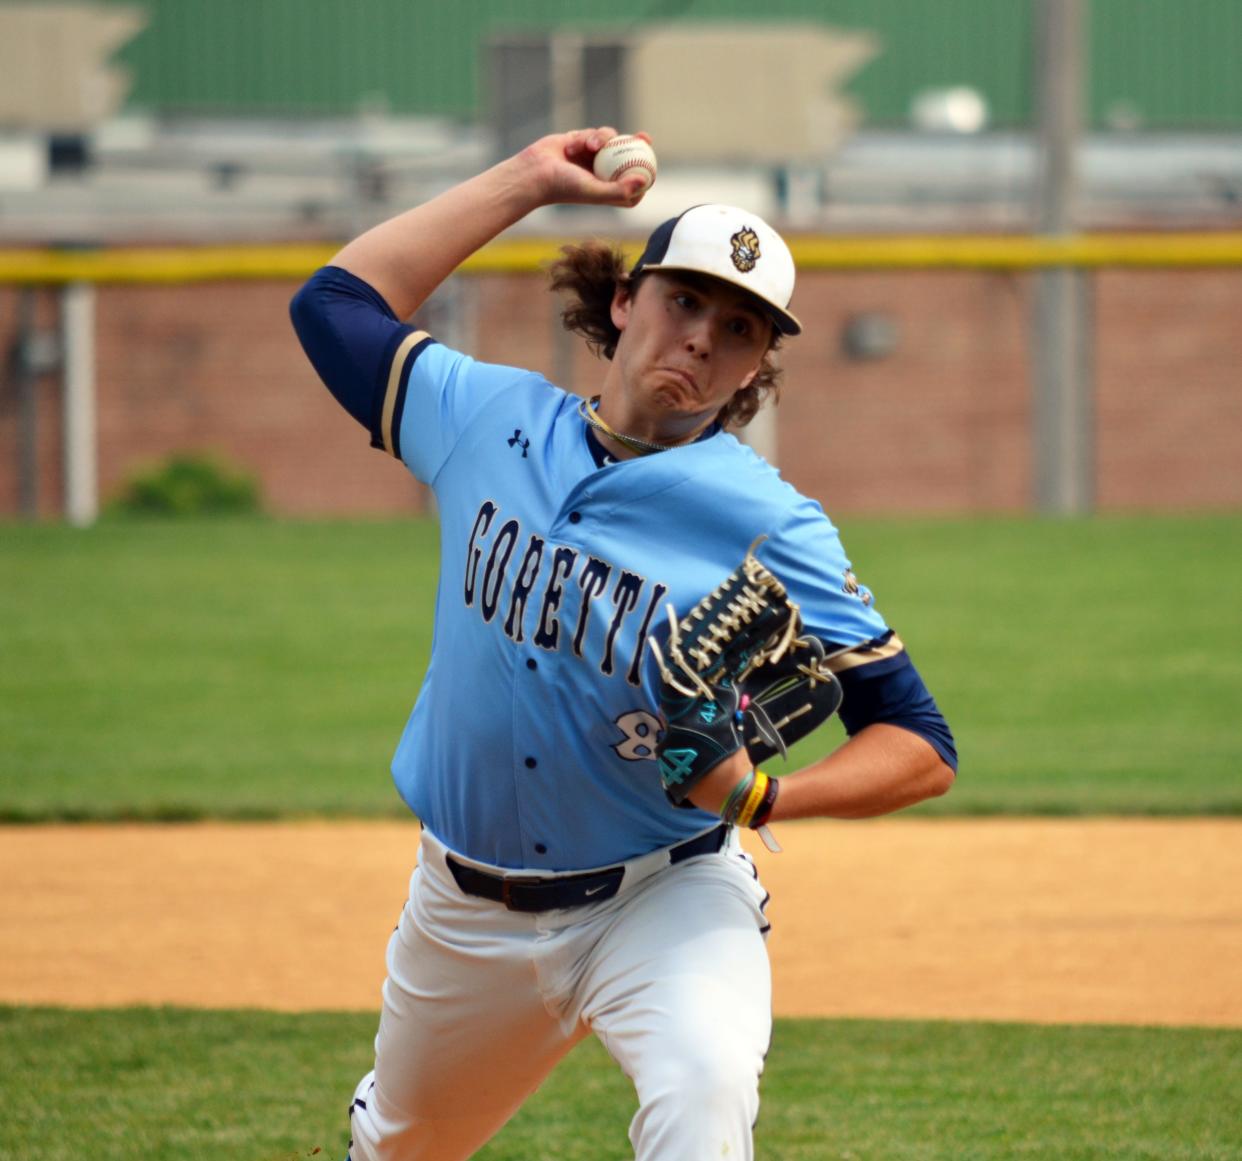 St. Maria Goretti's Andrew Kerns pitched a one-hit shutout with 13 strikeouts as the Gaels defeated Riverdale Baptist 10-0 in six innings in the Old Line League championship game last year.